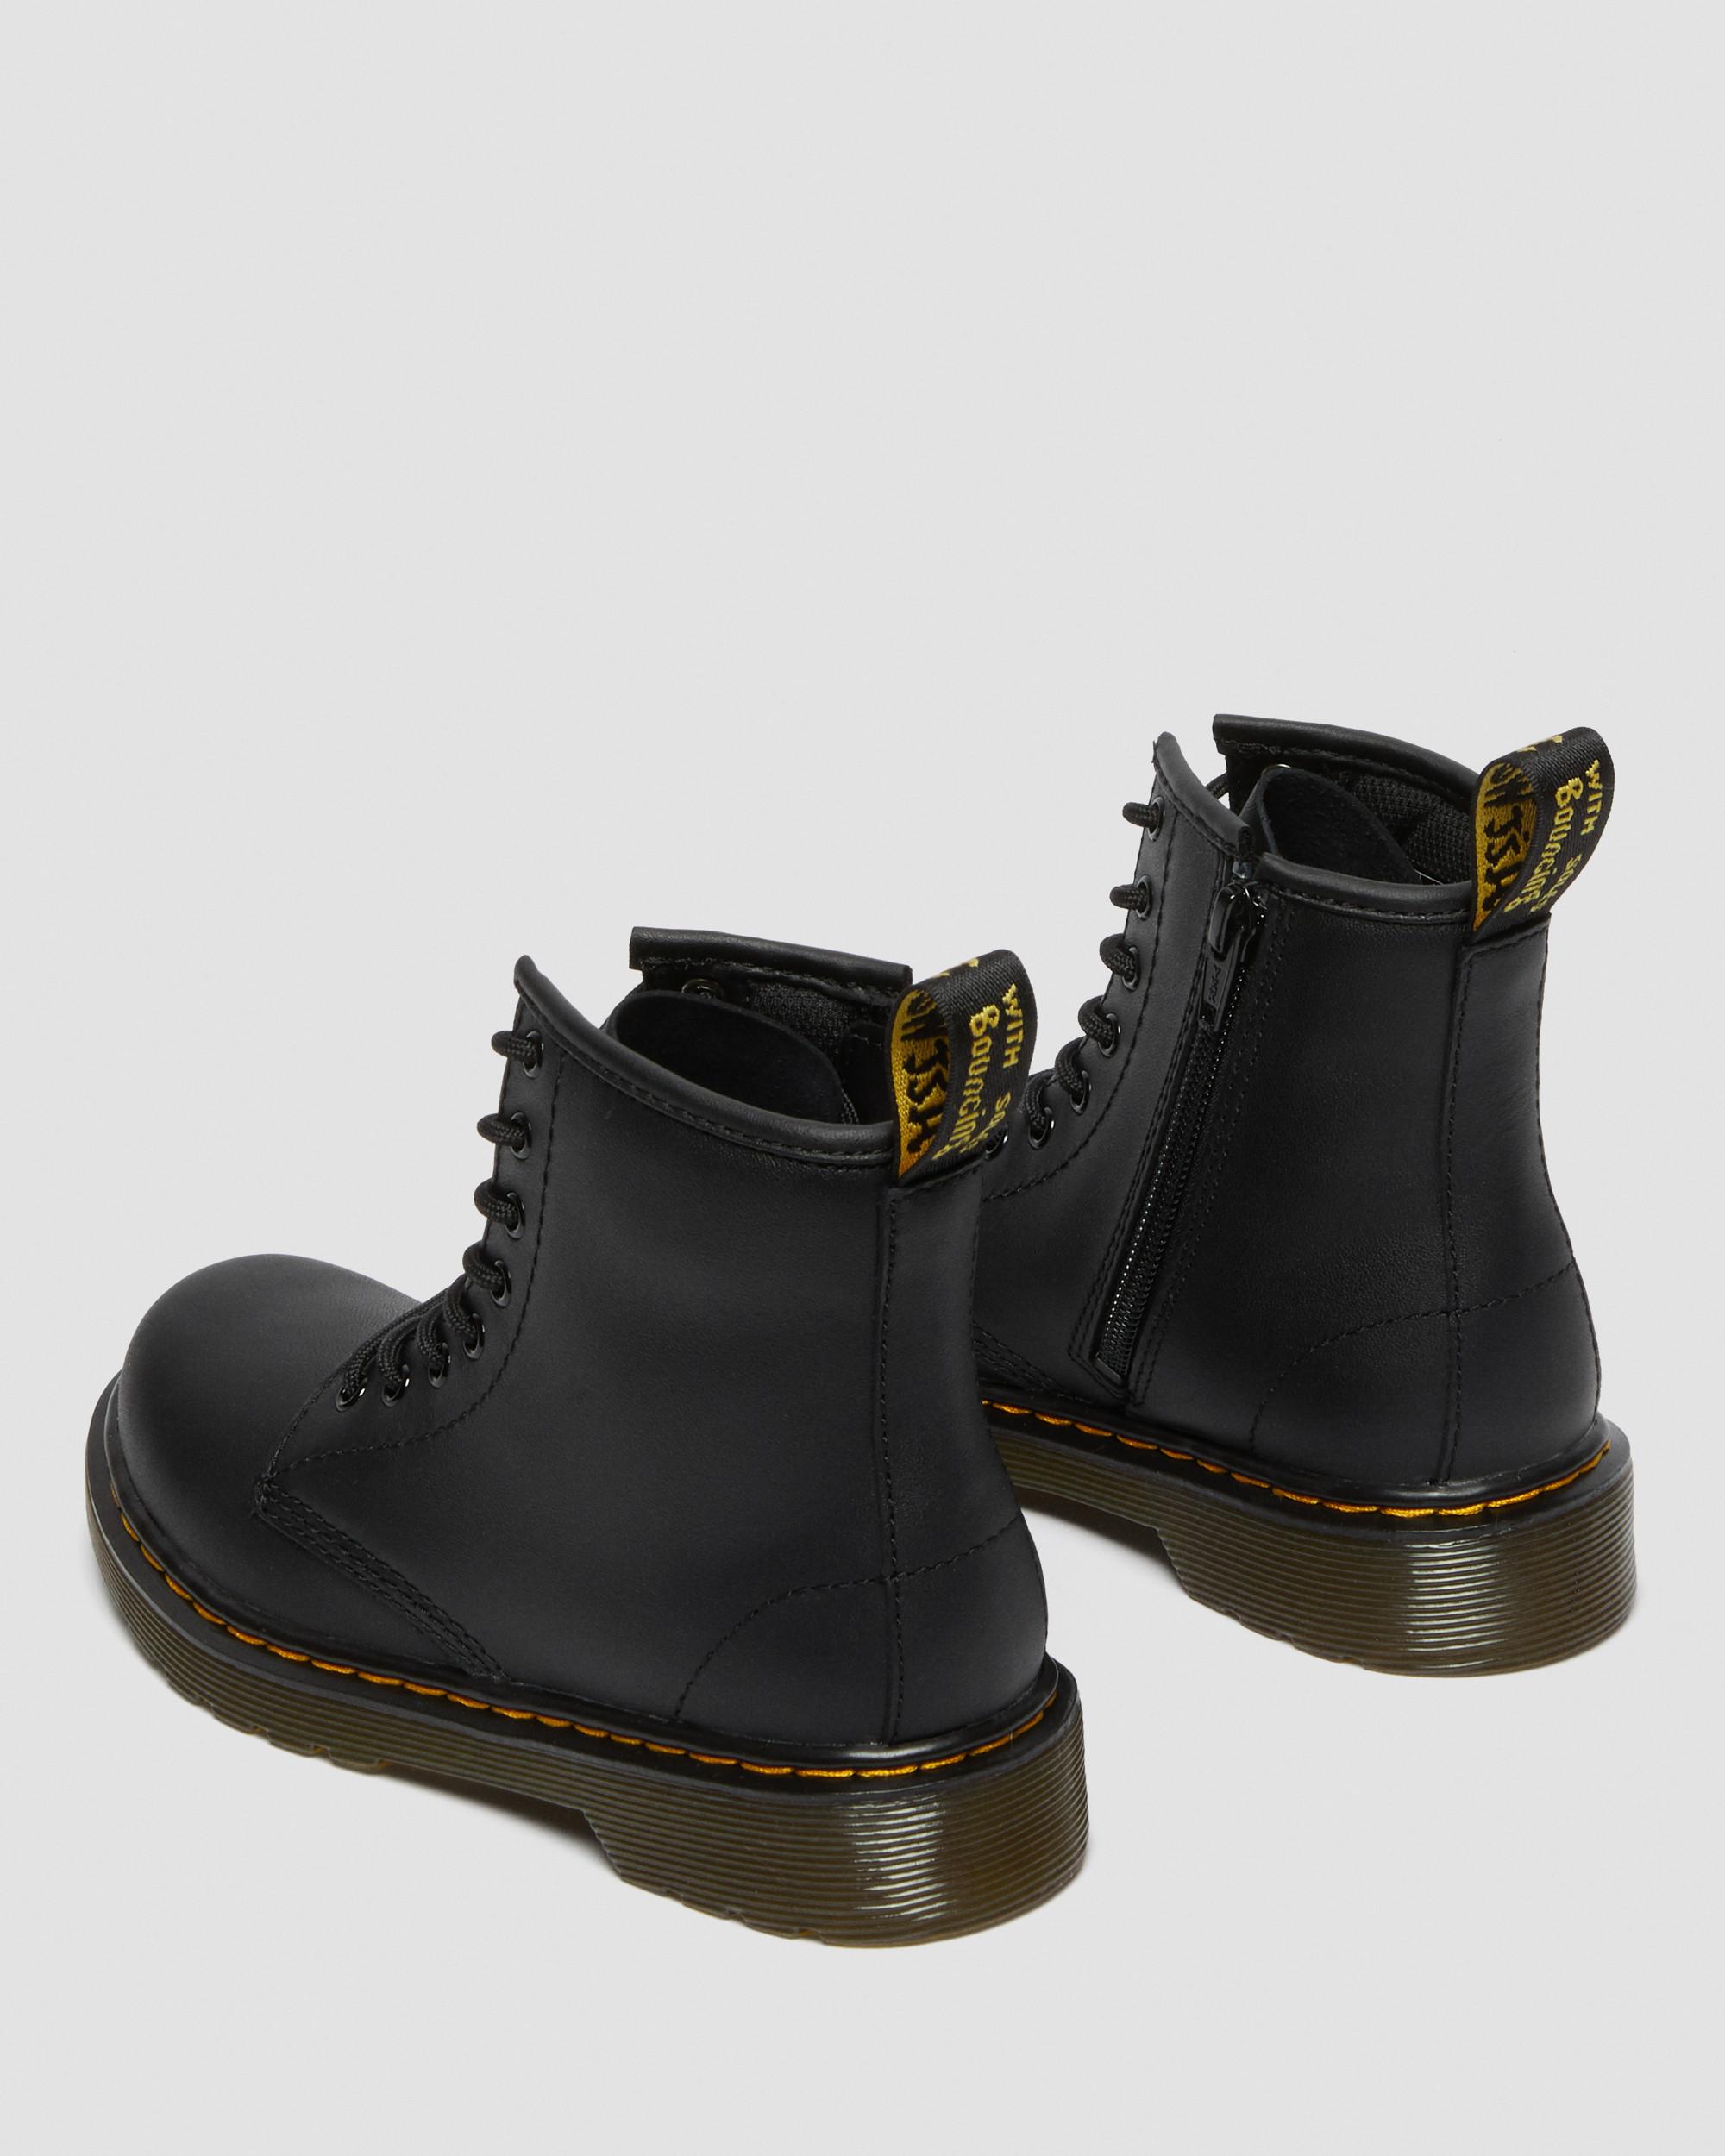 Vrijlating knal hefboom Junior 1460 Softy T Leather Lace Up Boots | Dr. Martens